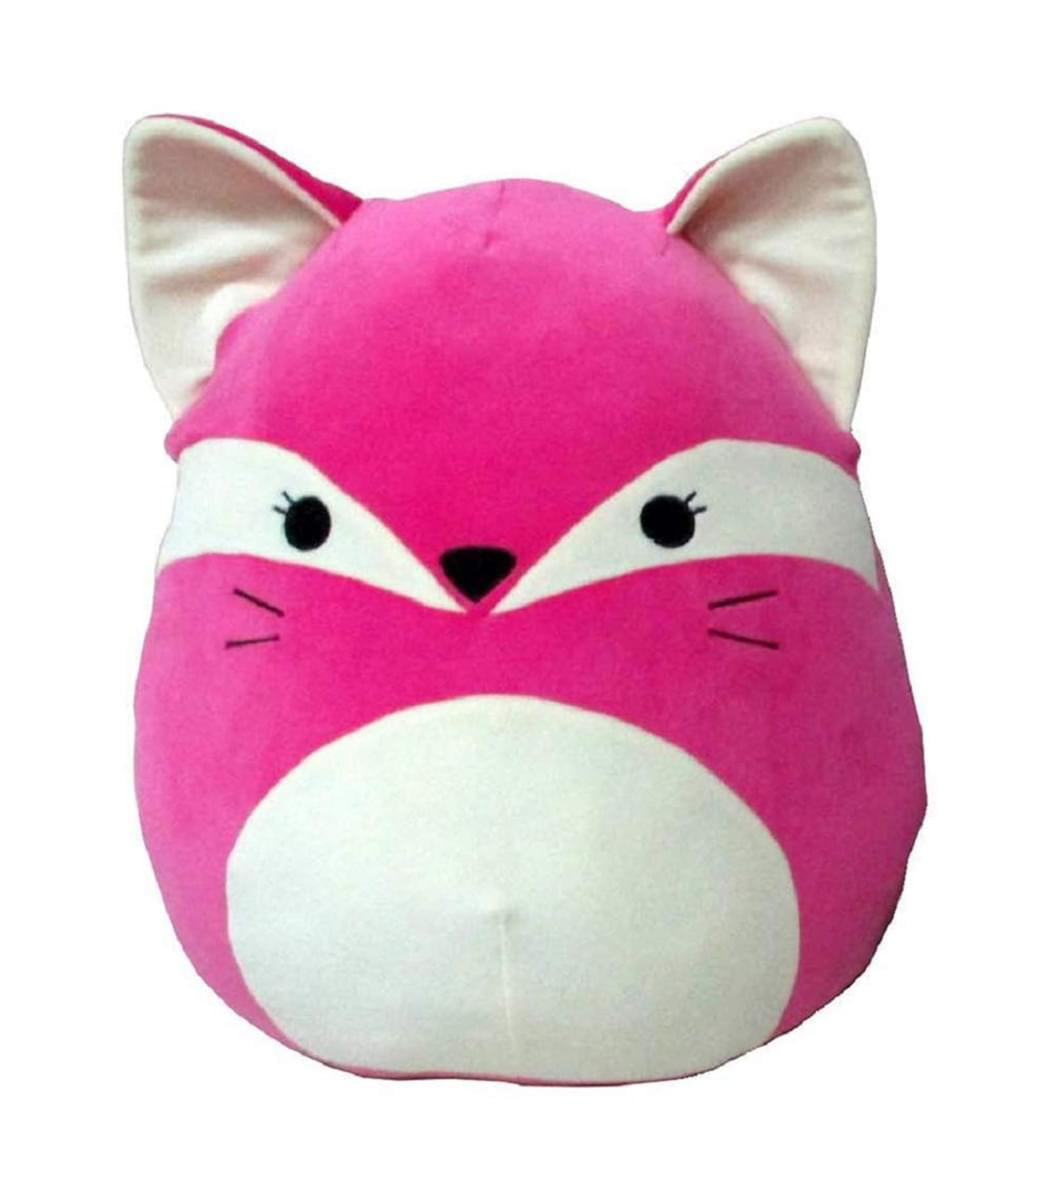 Squishmallow Fifi The Pink Fox LARGE 16" Plush Squishmallows Soft Cuddle Toy 